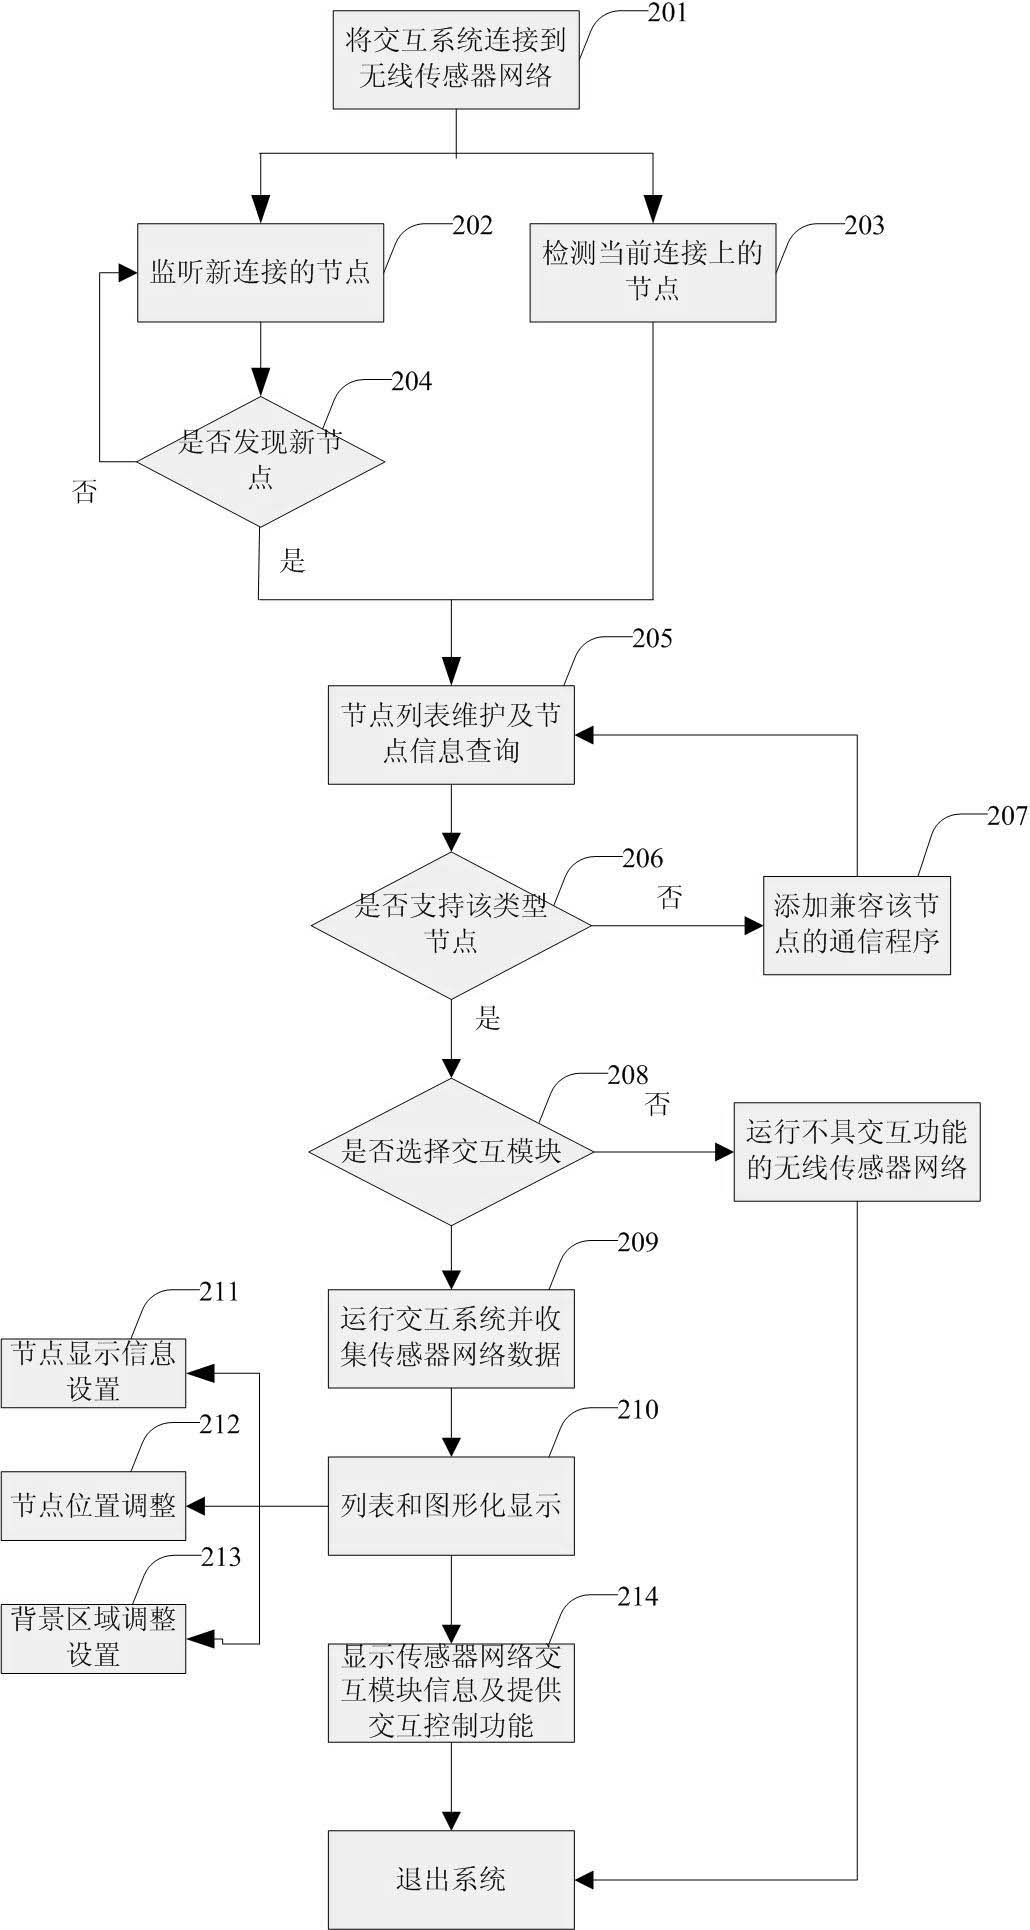 Distributed interactive method for large-scale wireless sensor network